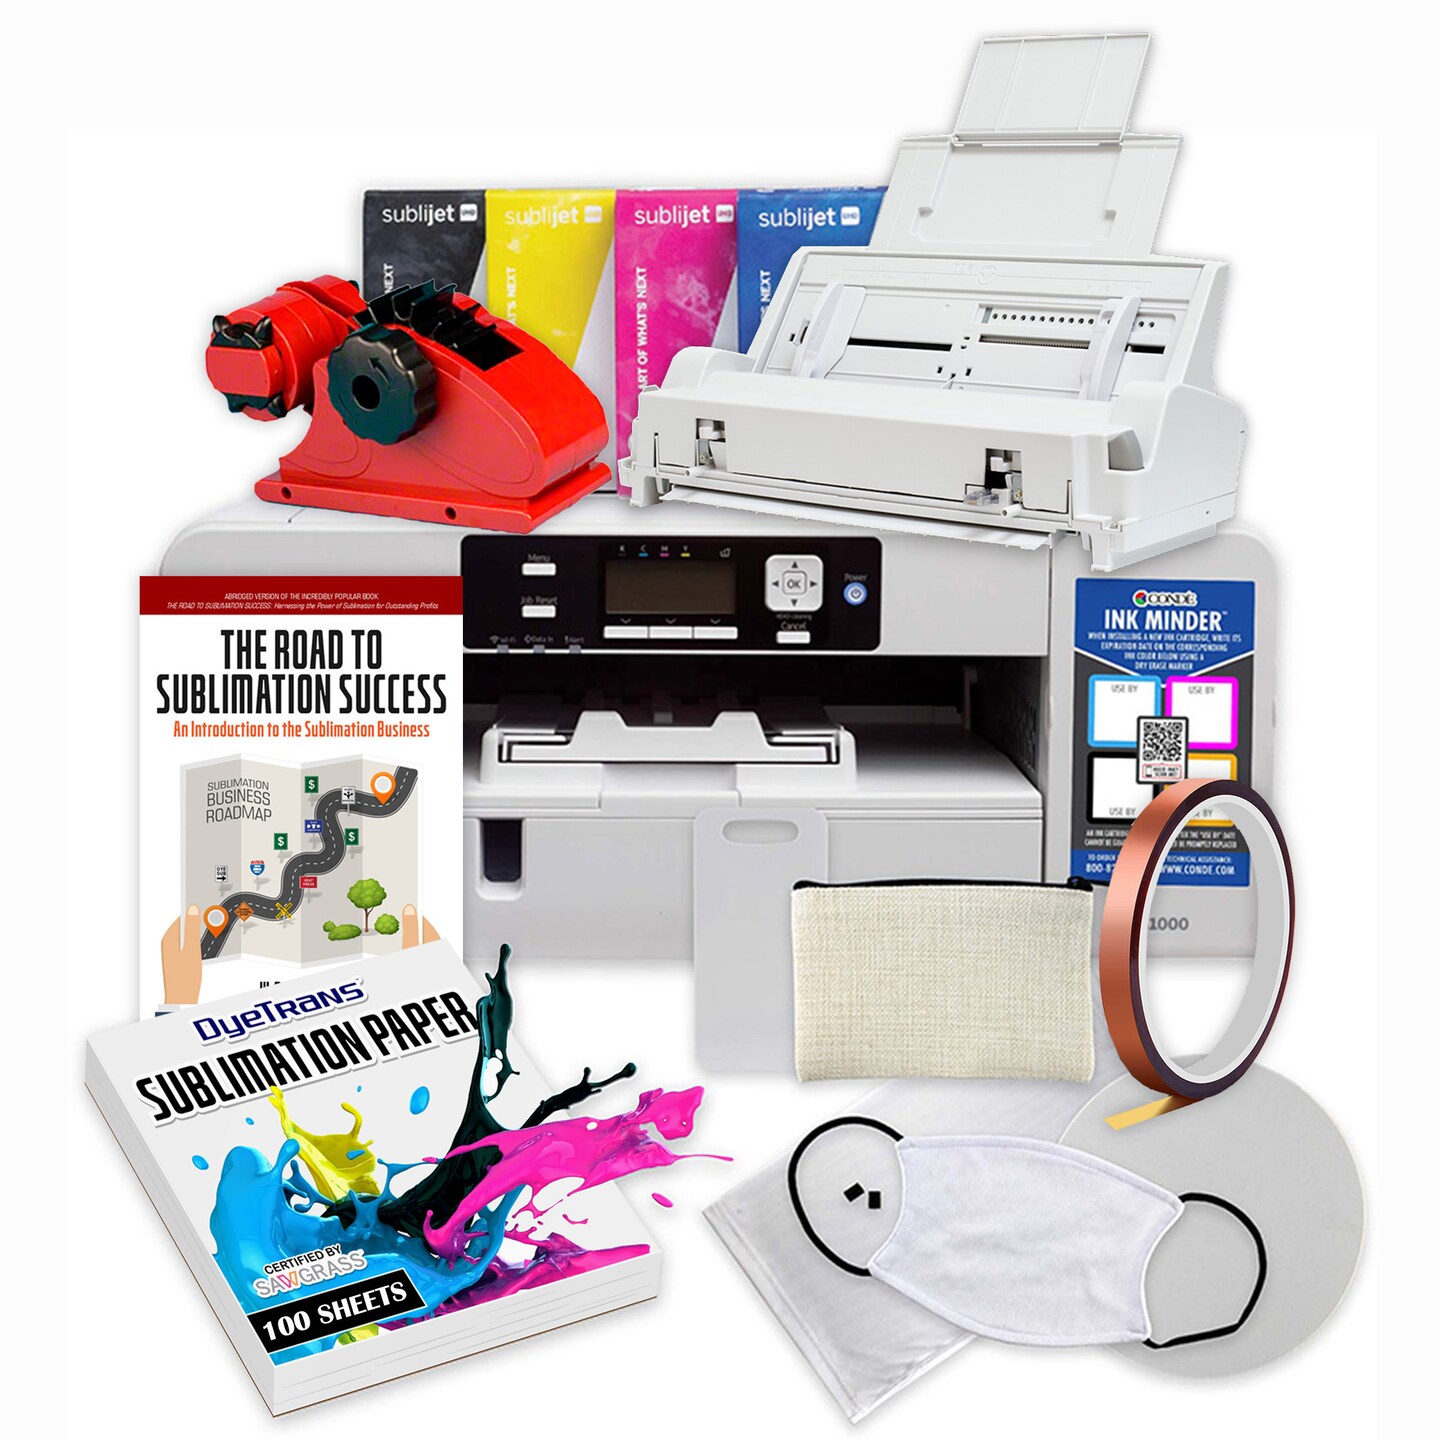 How to Use Siser EasySubli with an Epson Sublimation Printer - Silhouette  School